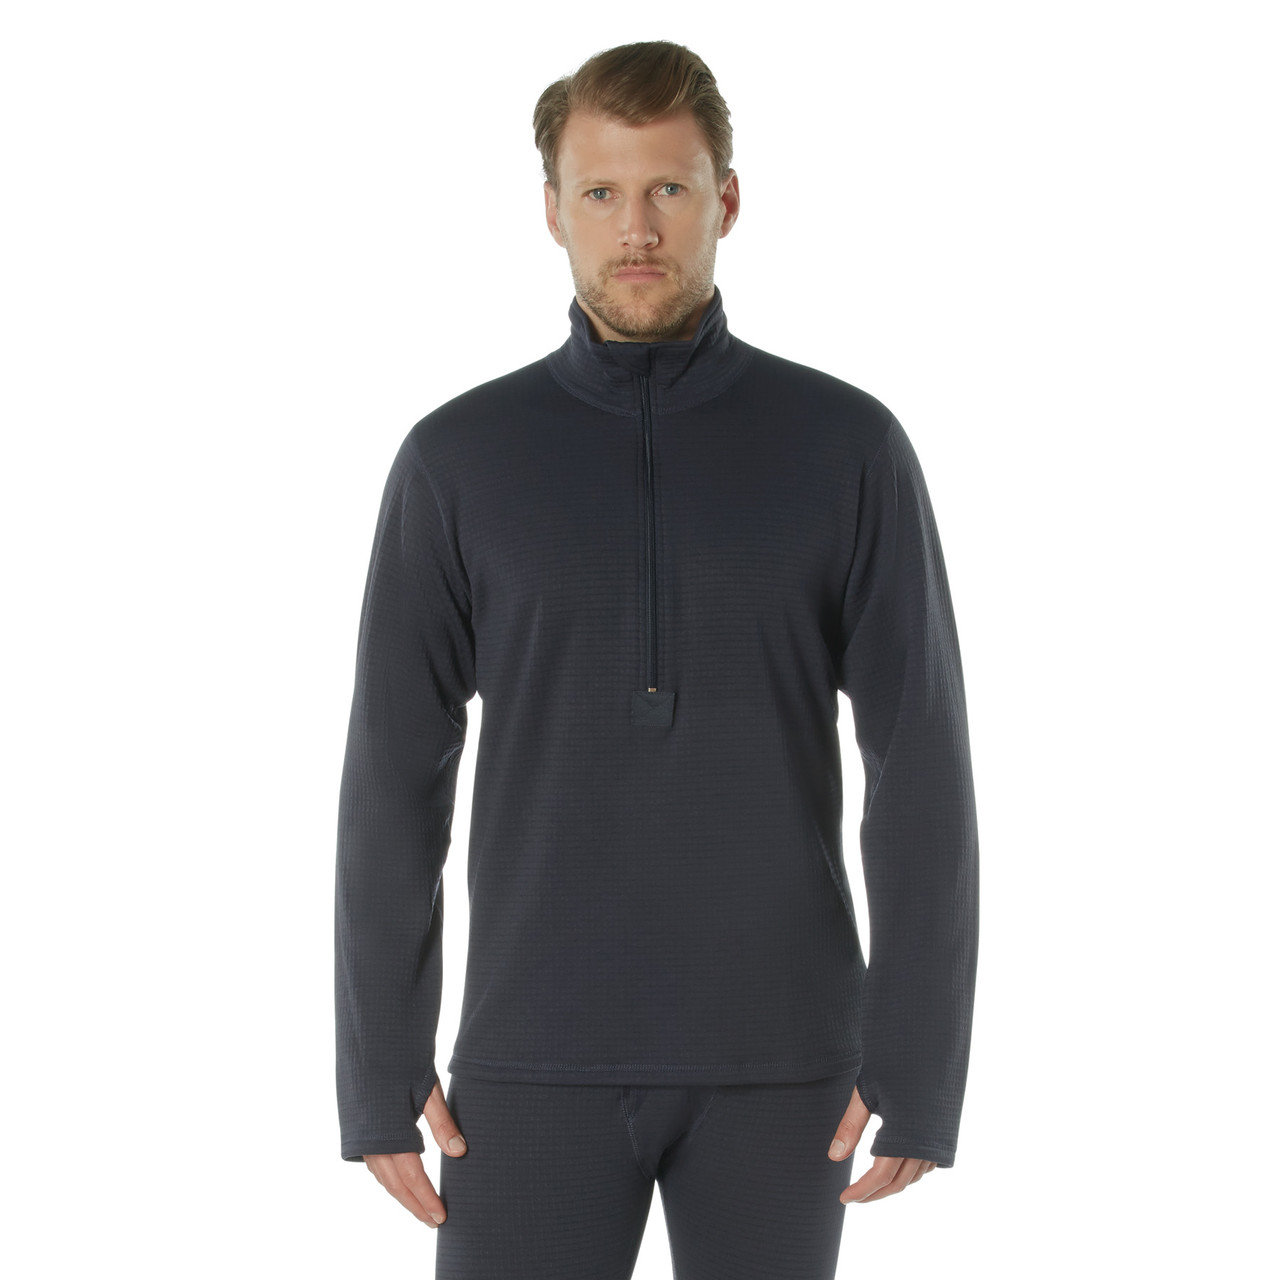 Rothco ECWCS Grid Fleece Top - Thunderhead Outfitters